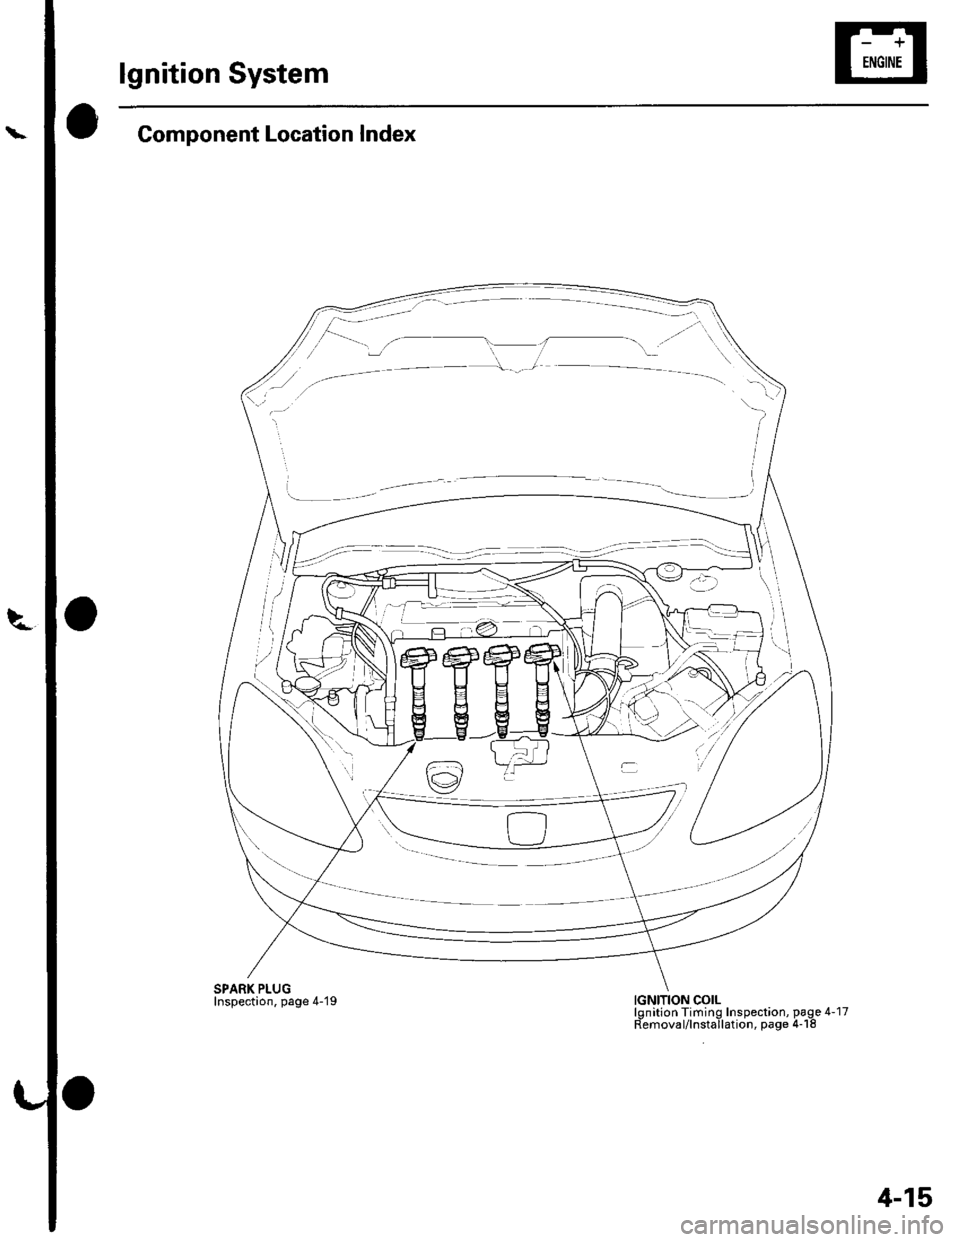 HONDA CIVIC 2003 7.G User Guide lgnition System
Component Location Index
SPARK PLUGInspection, page 4-19IGNITION COILlgnition Timing Inspection, page 4-17Removal/lnstallation, page 4-18
4-15 